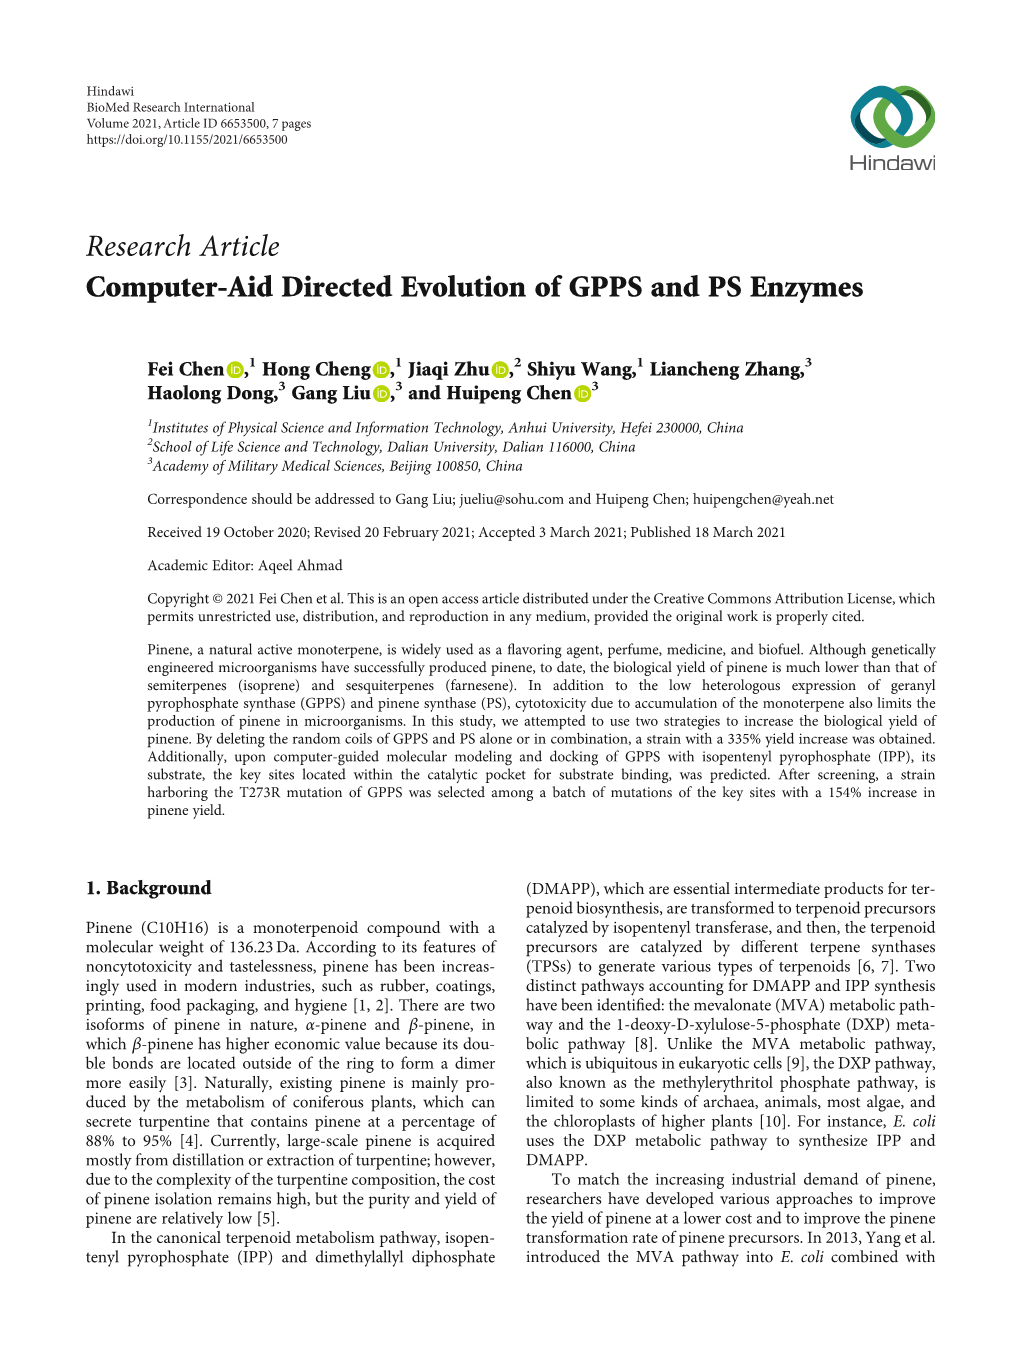 Research Article Computer-Aid Directed Evolution of GPPS and PS Enzymes